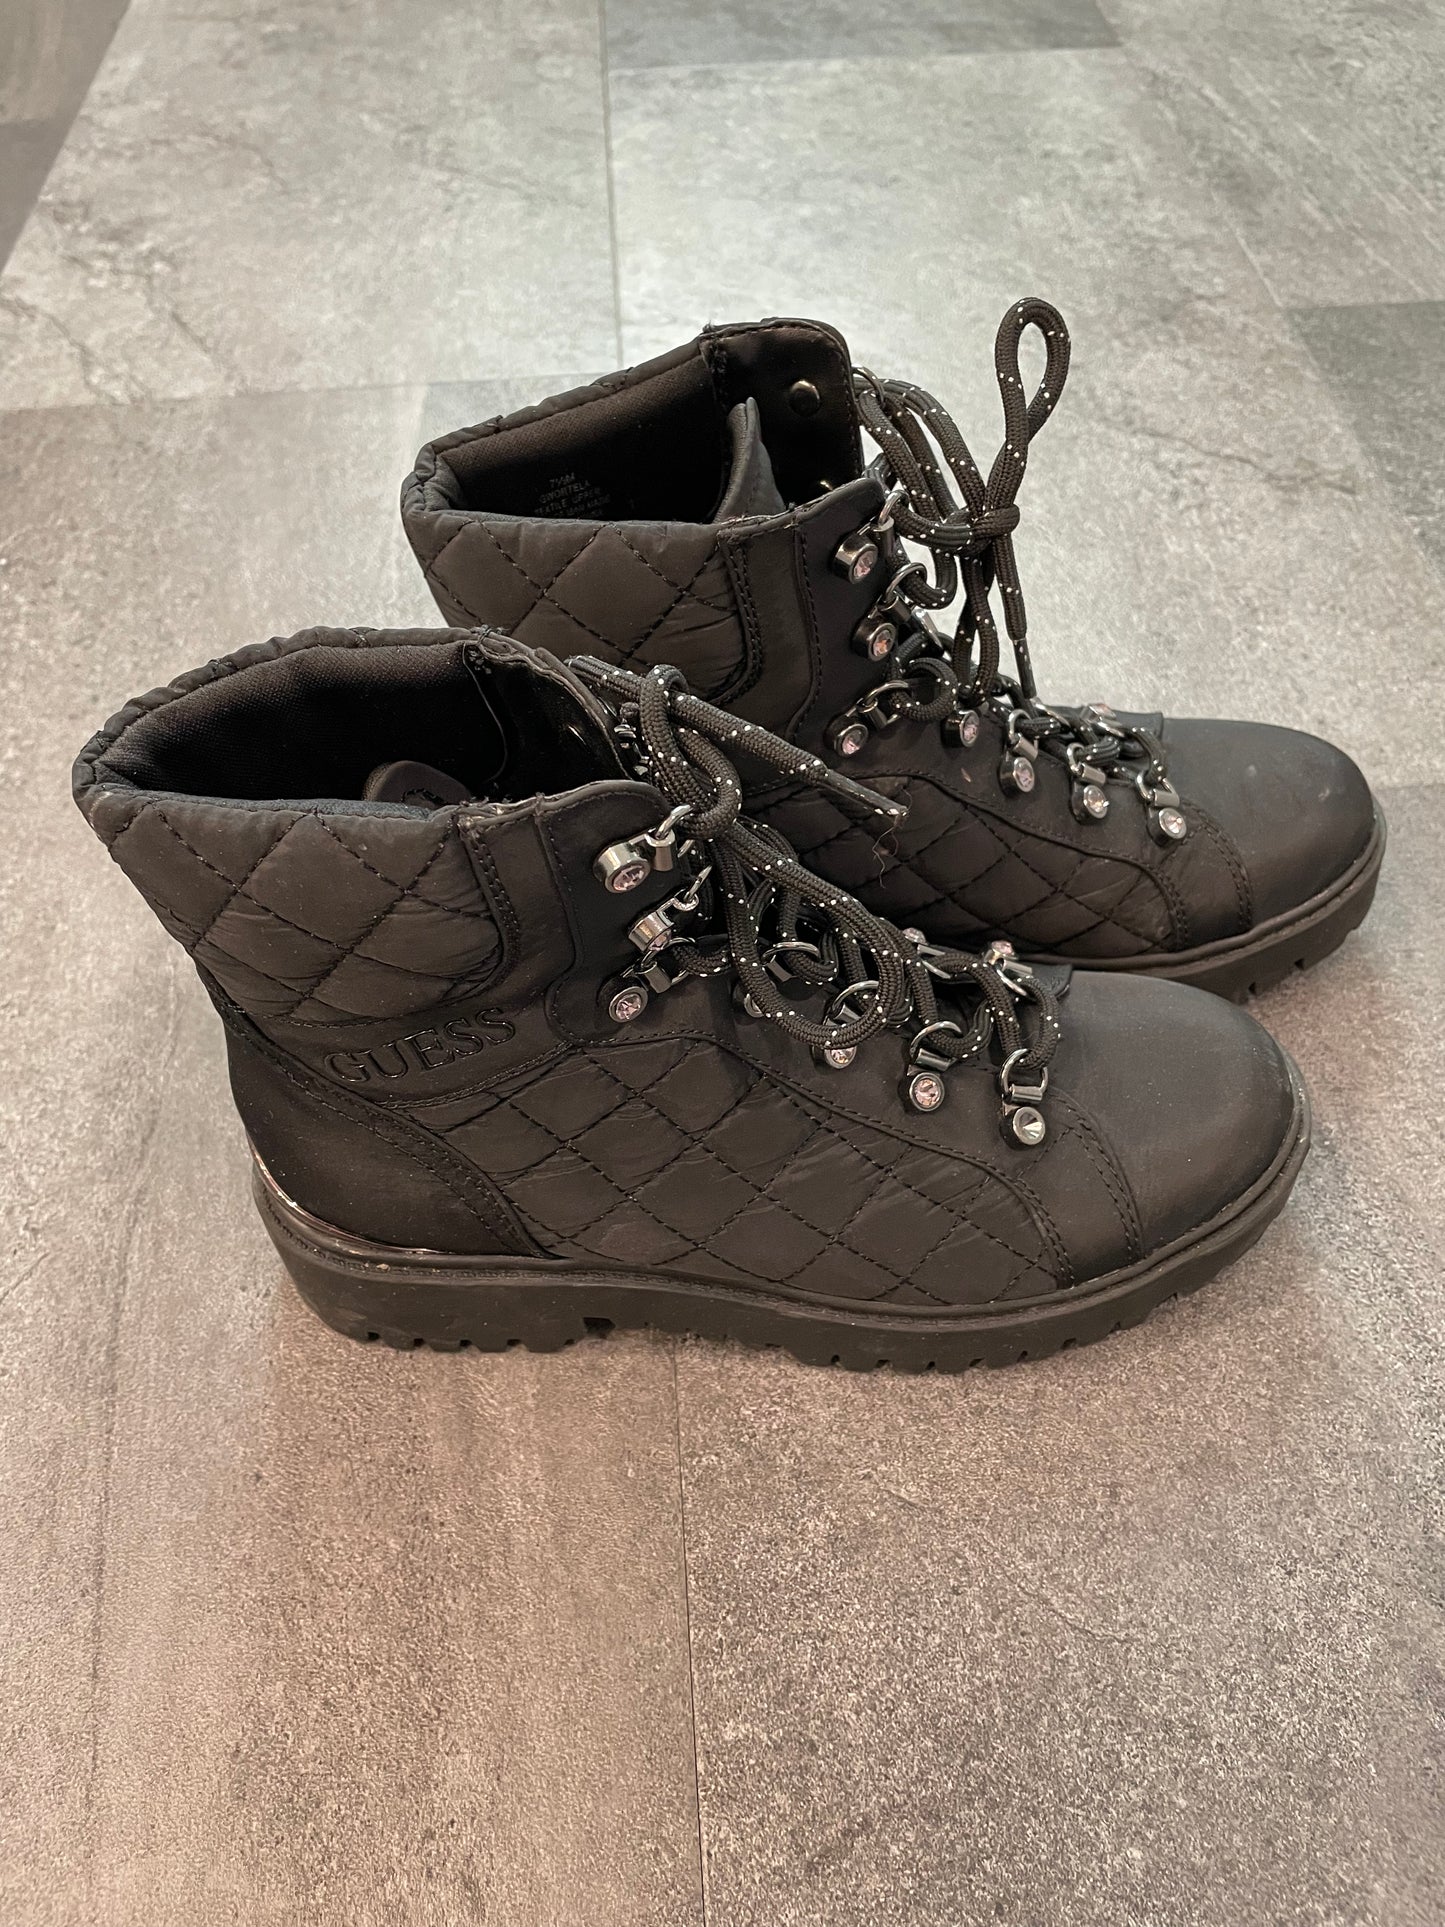 Guess Quilted Boots (7.5M)